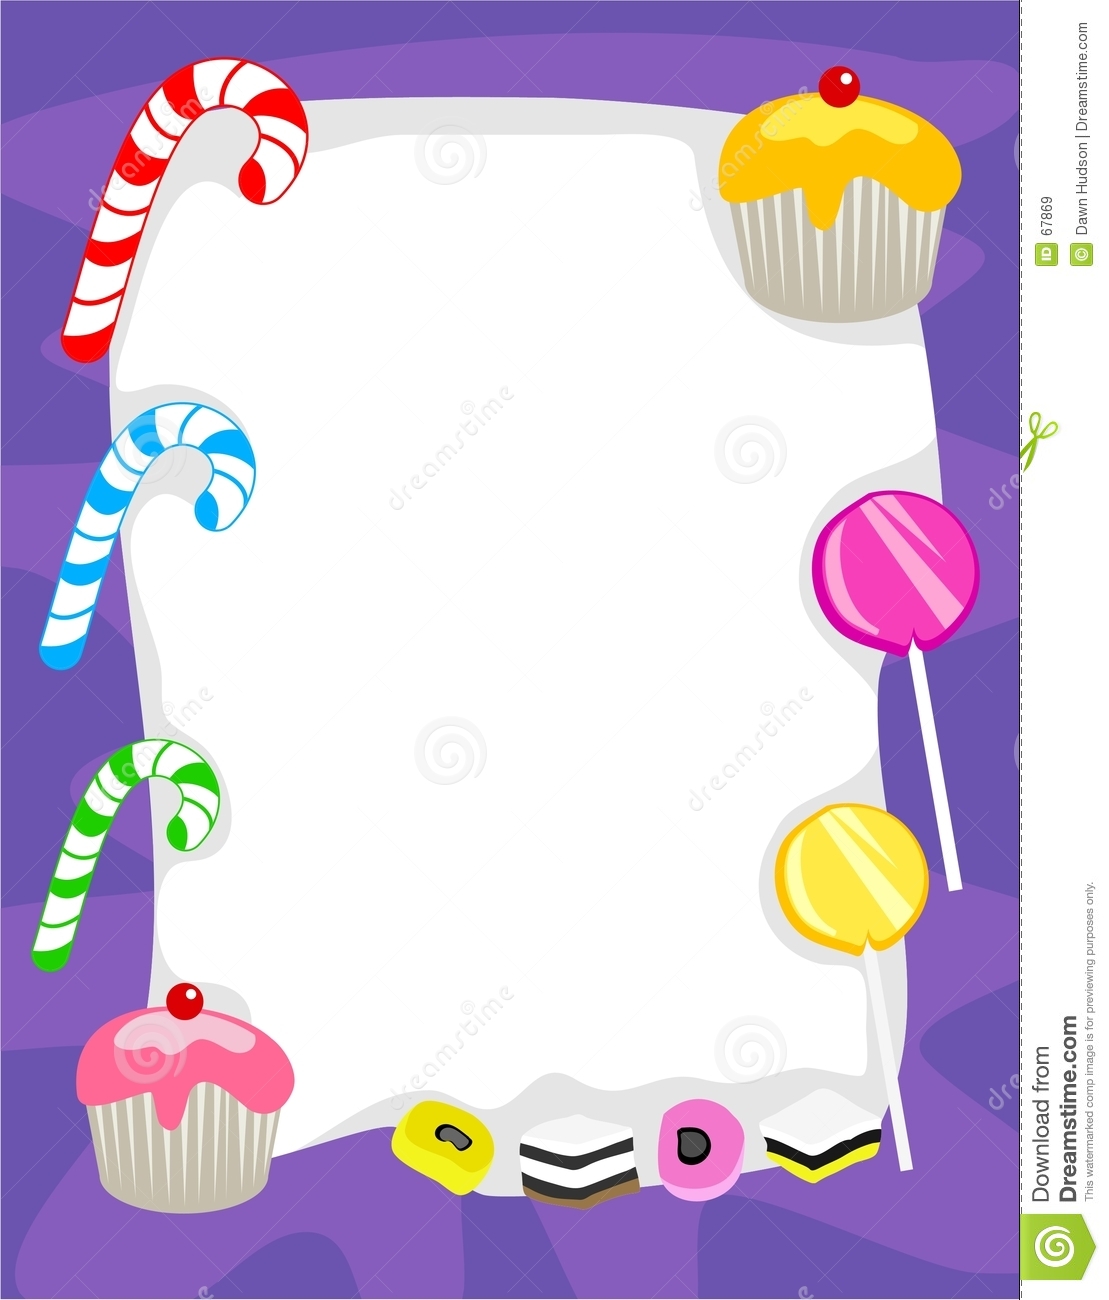 Candy Border Royalty Free Stock Images   Image  67869